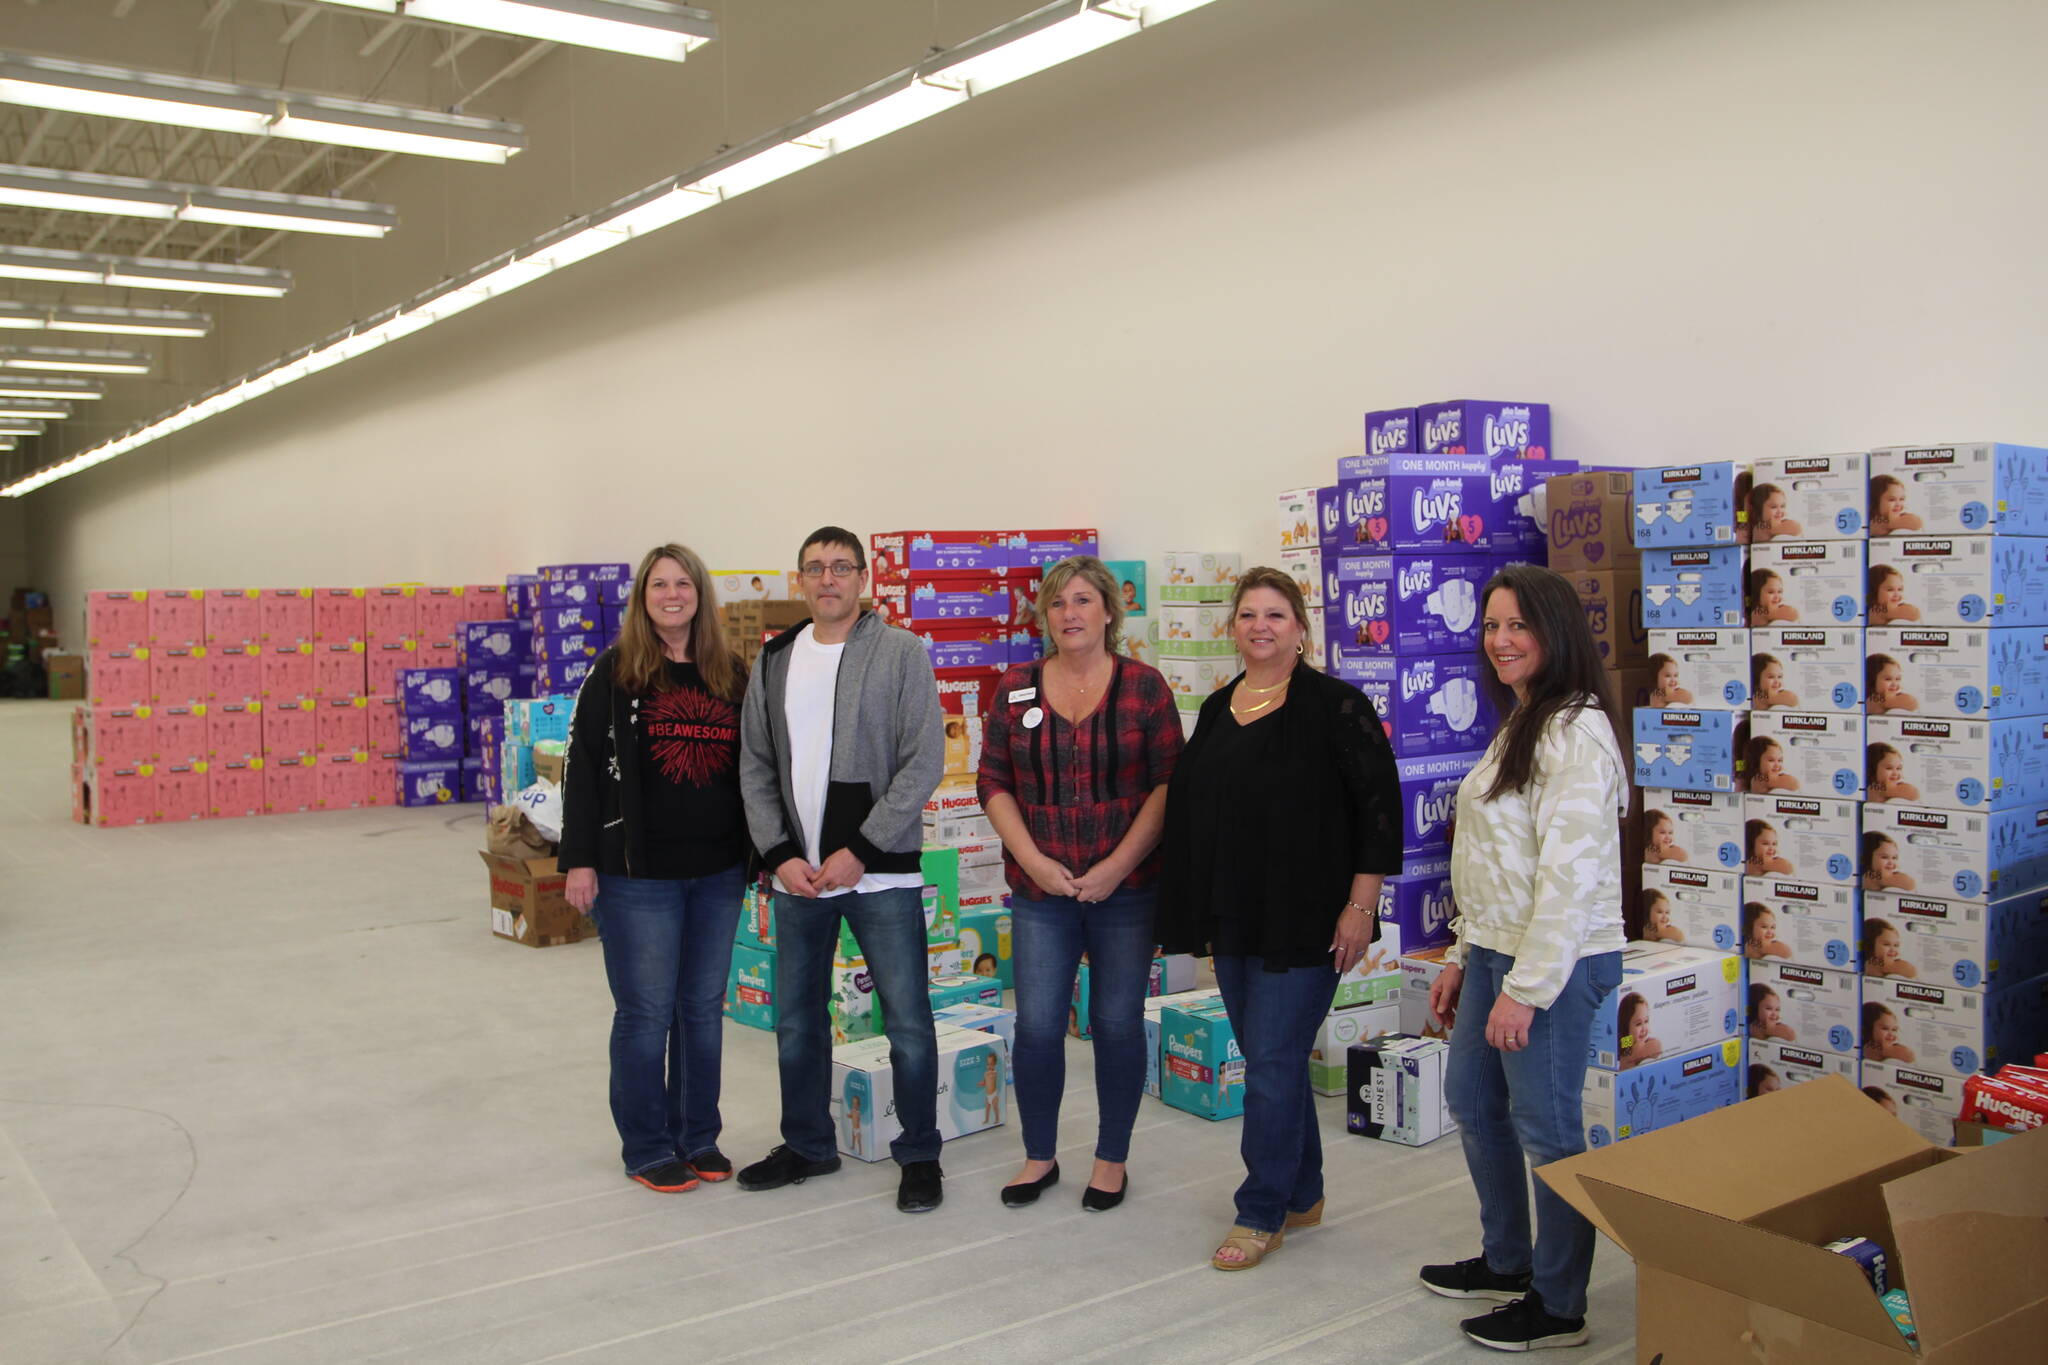 Olivia Sullivan/the Mirror
Nonprofit founder Cheryl Hurst, center, with volunteers Karlyn Devereaux, Joe Hutchinson, Cari Franklin and Anna Patrick inside an empty retail space in Federal Way where thousands of diapers were stored during the March of Diapers event.